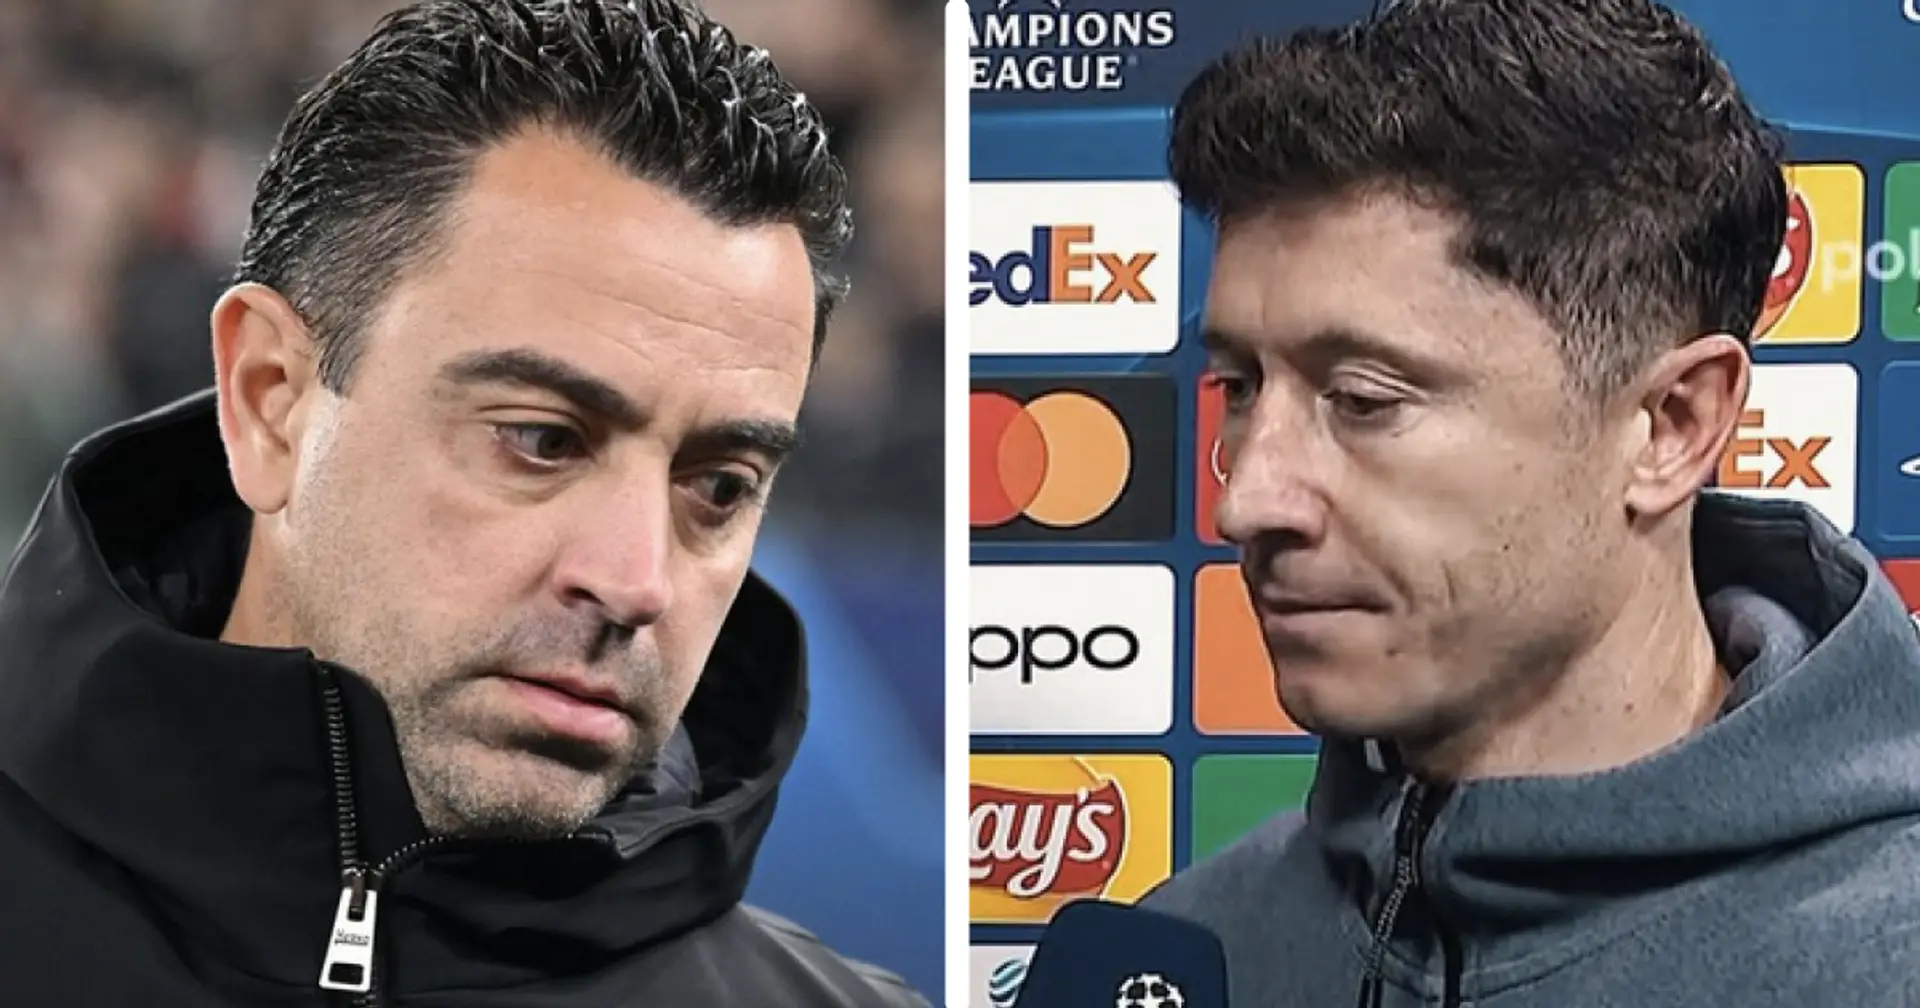 'We should've played differently': Lewandowski seems to aim another dig at Xavi amid Shakhtar loss